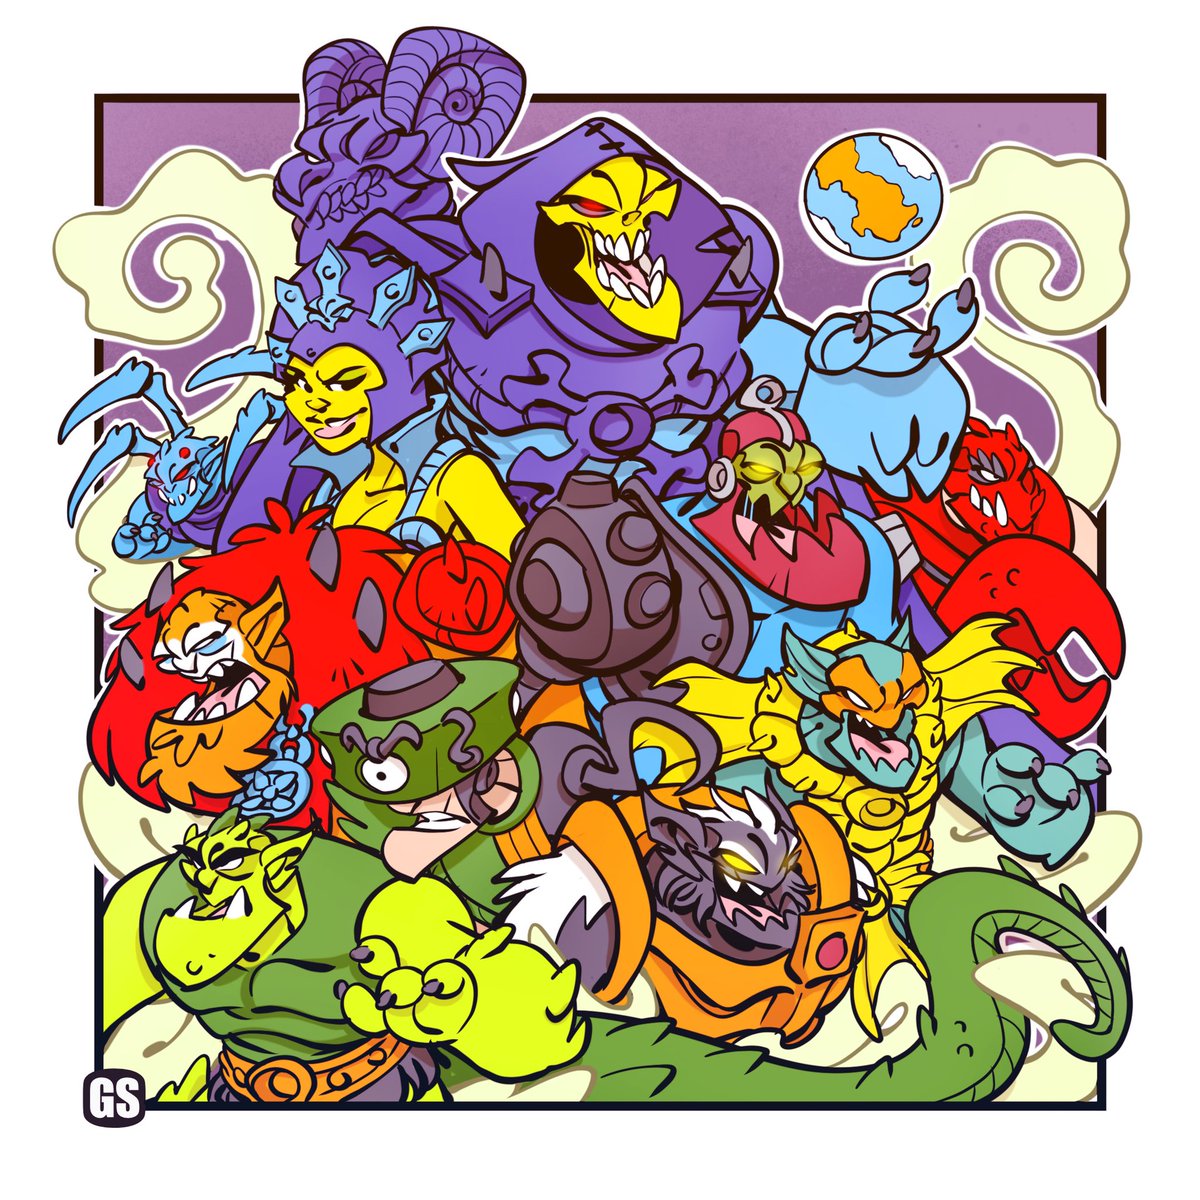 Happy Masters of the Universe Day!
Drew the forces of evil to celebrate my favorite franchise!
Stay tooned!
#motuday #motu